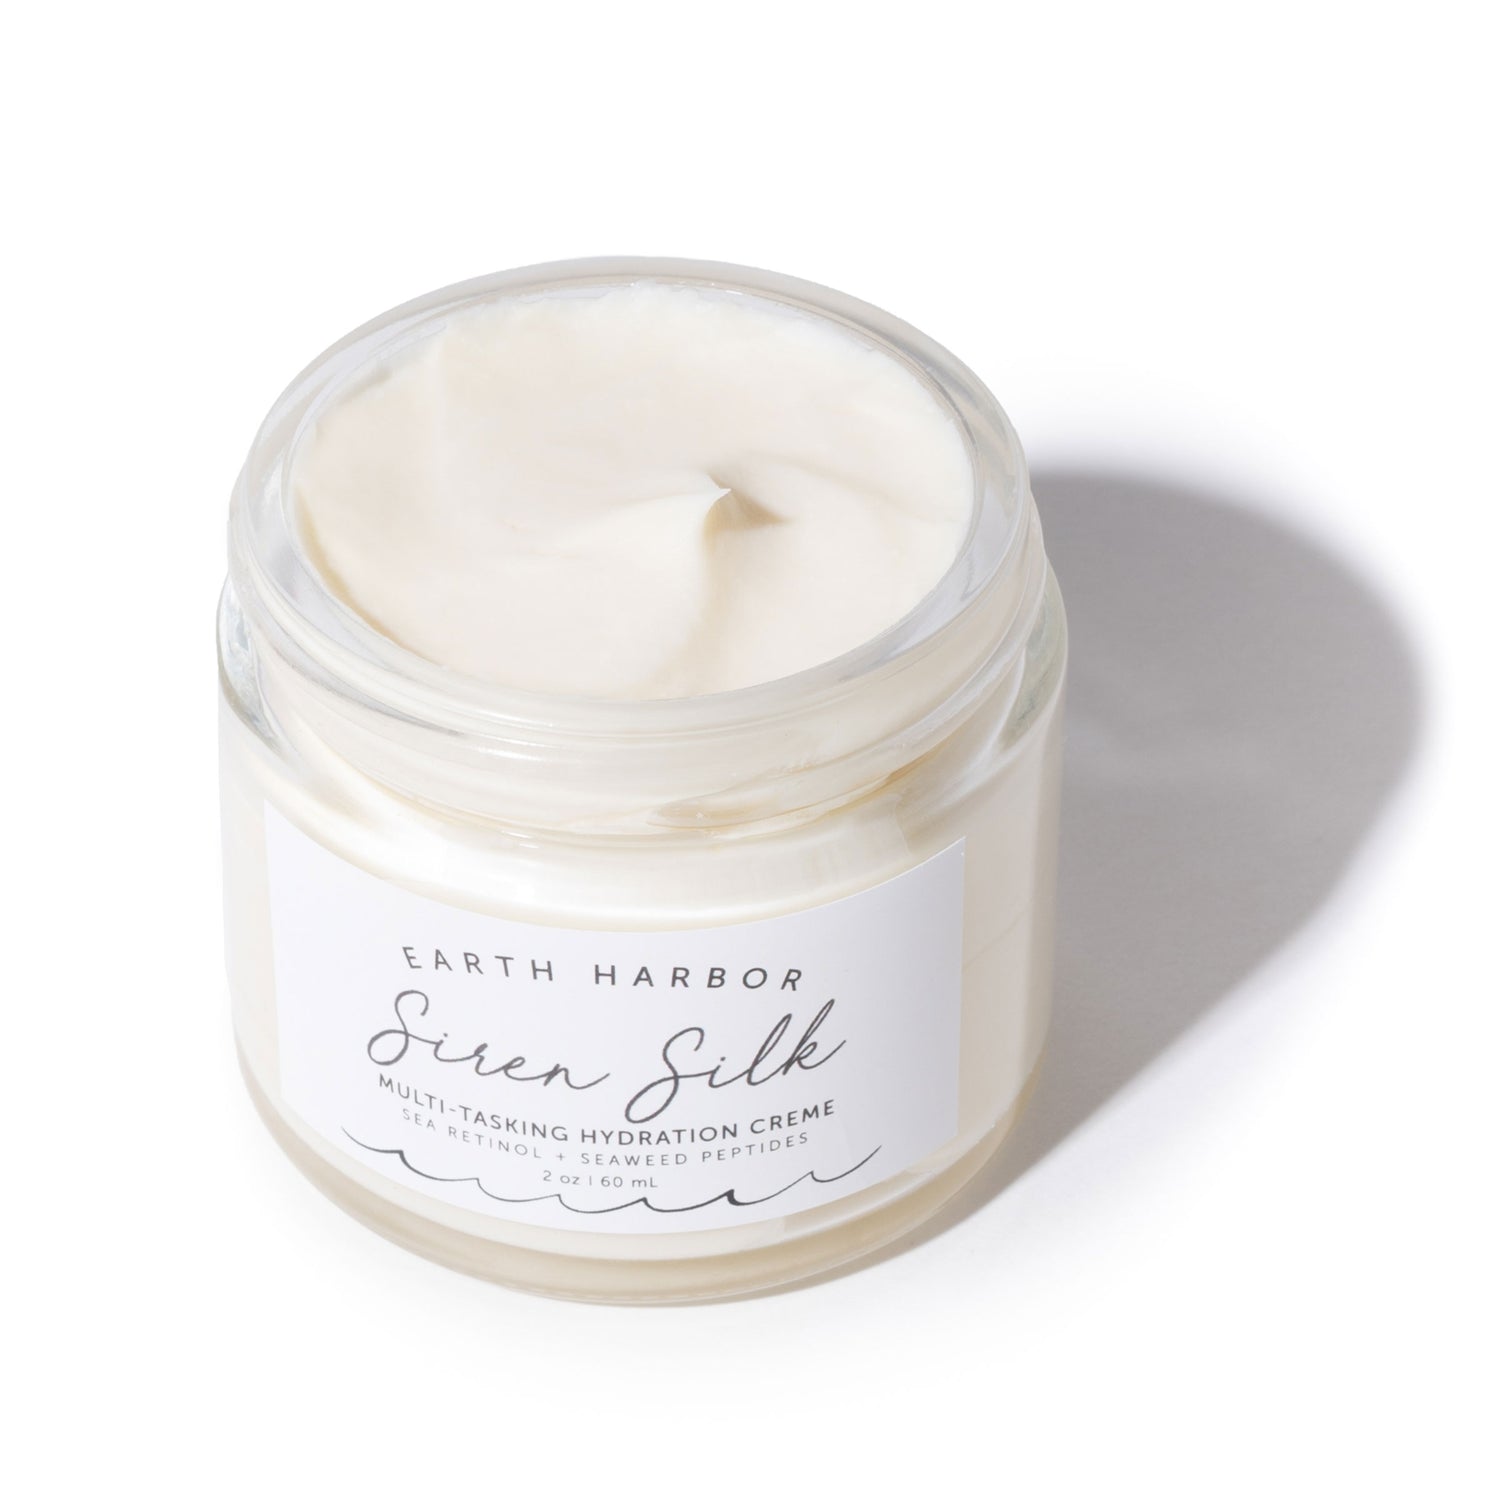 Earth Harbor Siren Silk is a purely natural whipped creme. Hydrating, resurfacing and rejuvenating while she feeds skin.